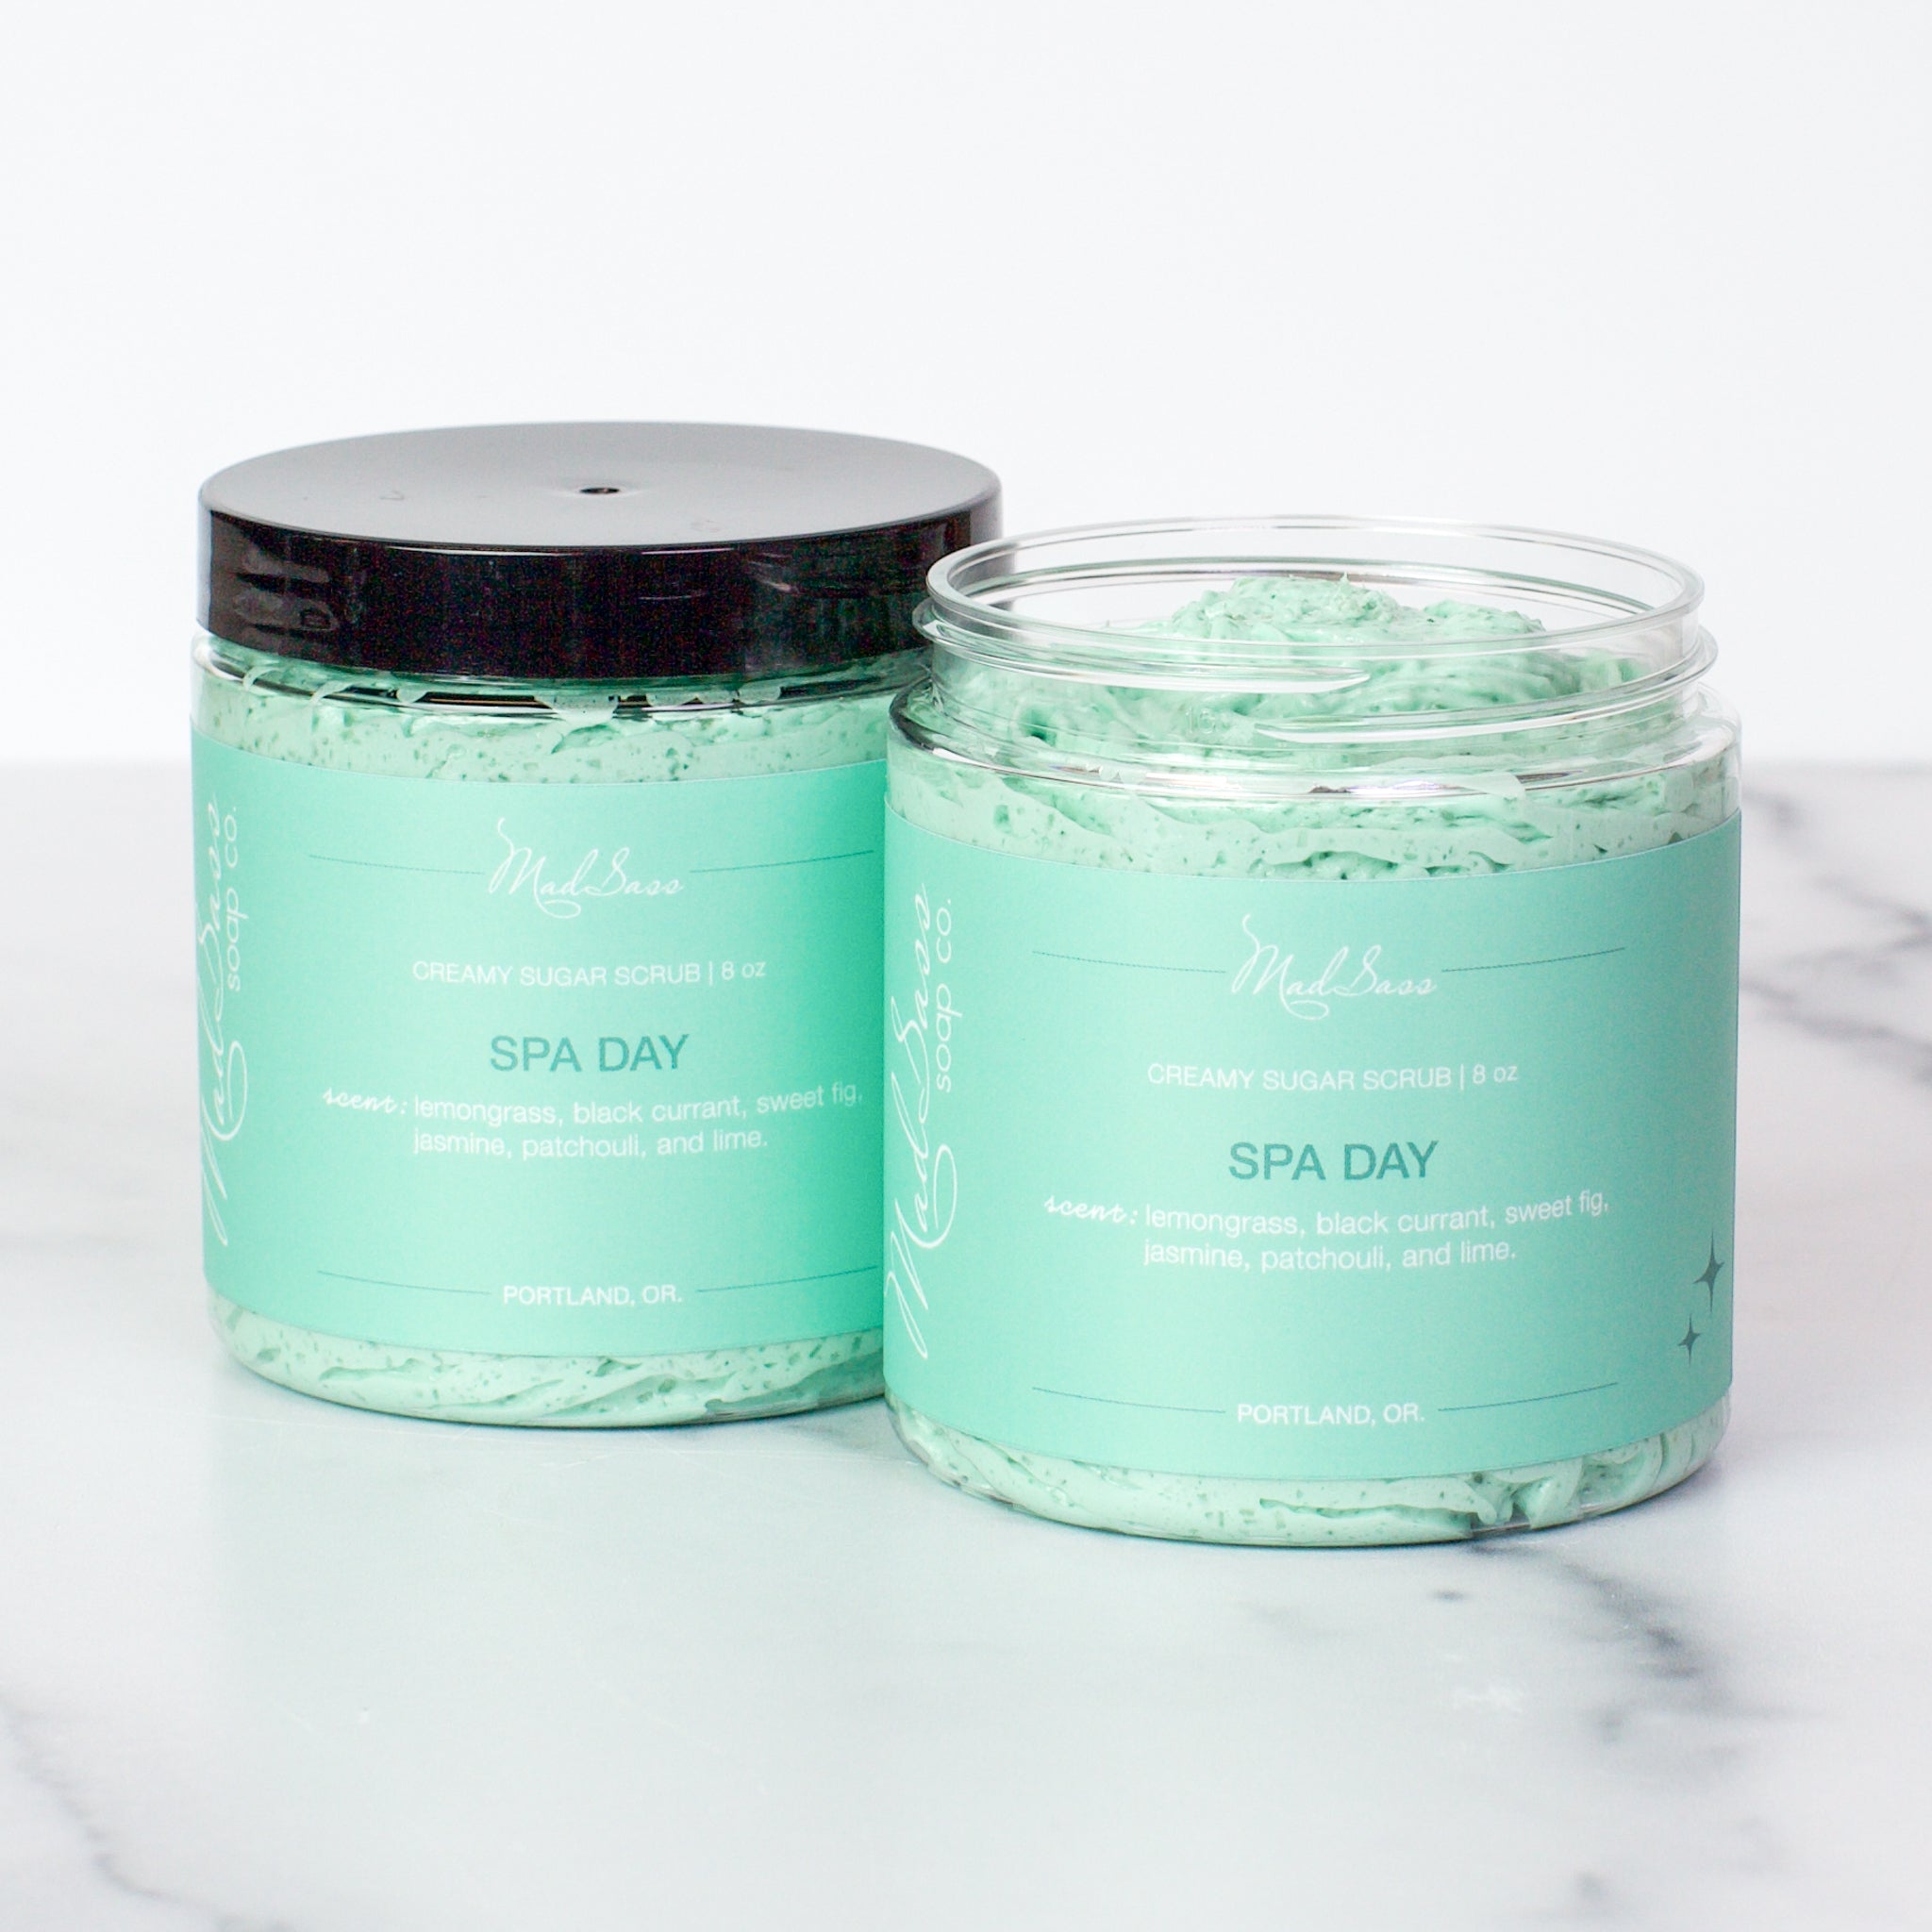 Two containers of Spa Day Creamy Sugar Scrubs on a white background. Spa Day is a light teal scrub in a clear tub.